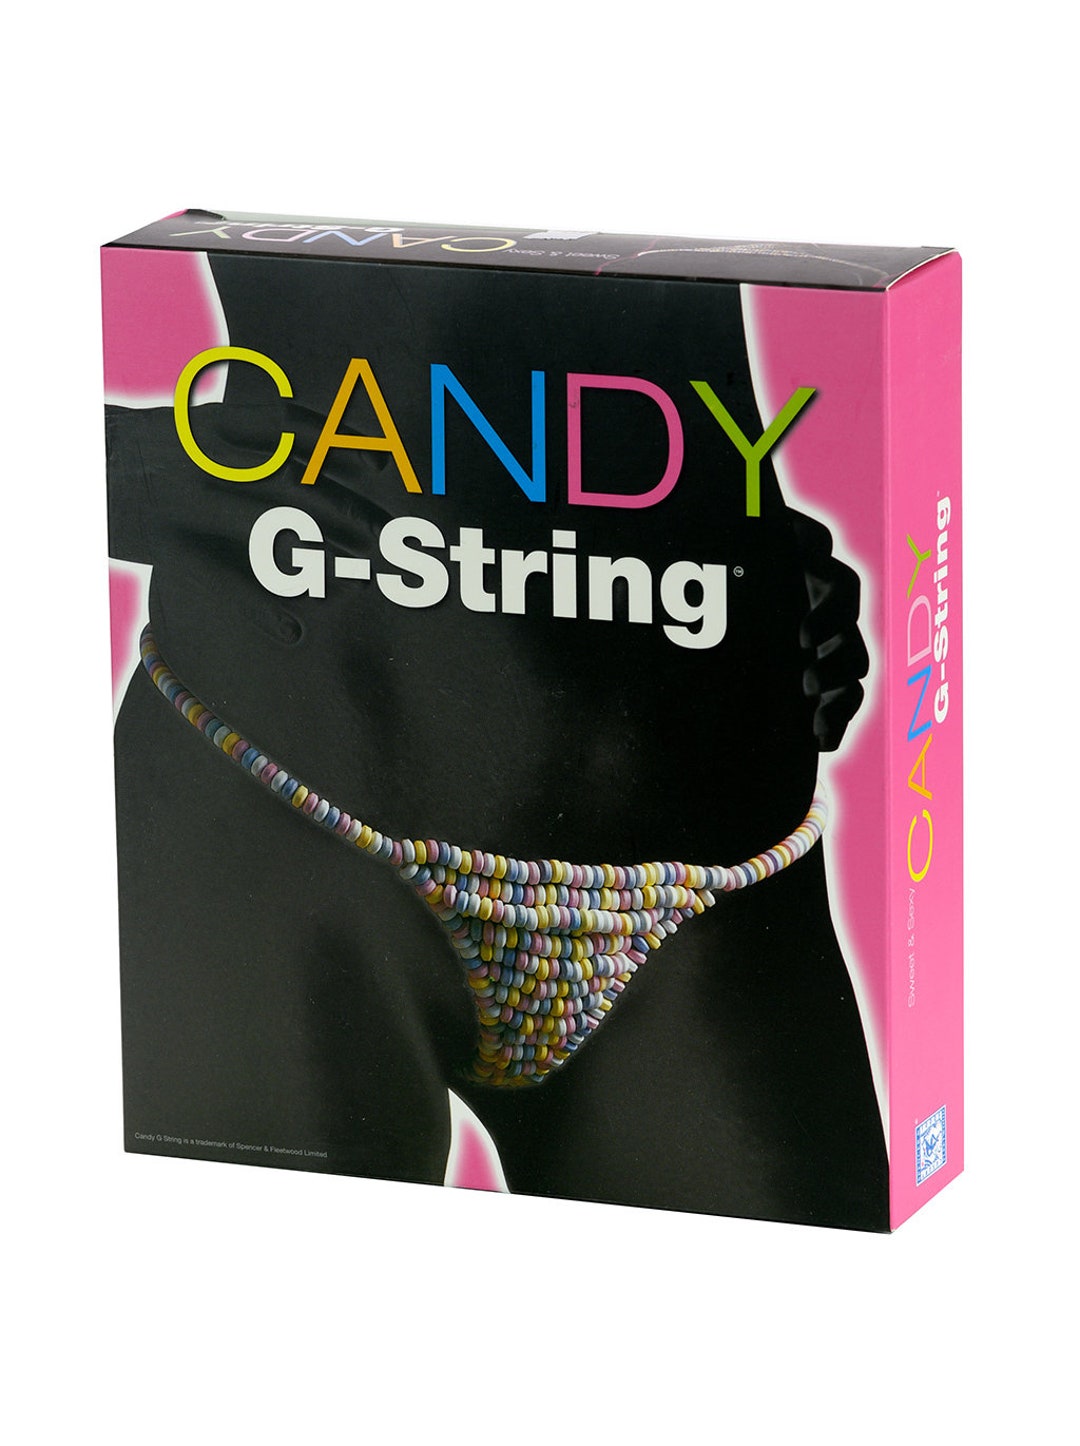 Candy G-string Novelty Edible Gifts for Women Wife Girlfriend Sexy Gifts  for Ladies Naughty Fun Gifts Underwear You Can Eat 